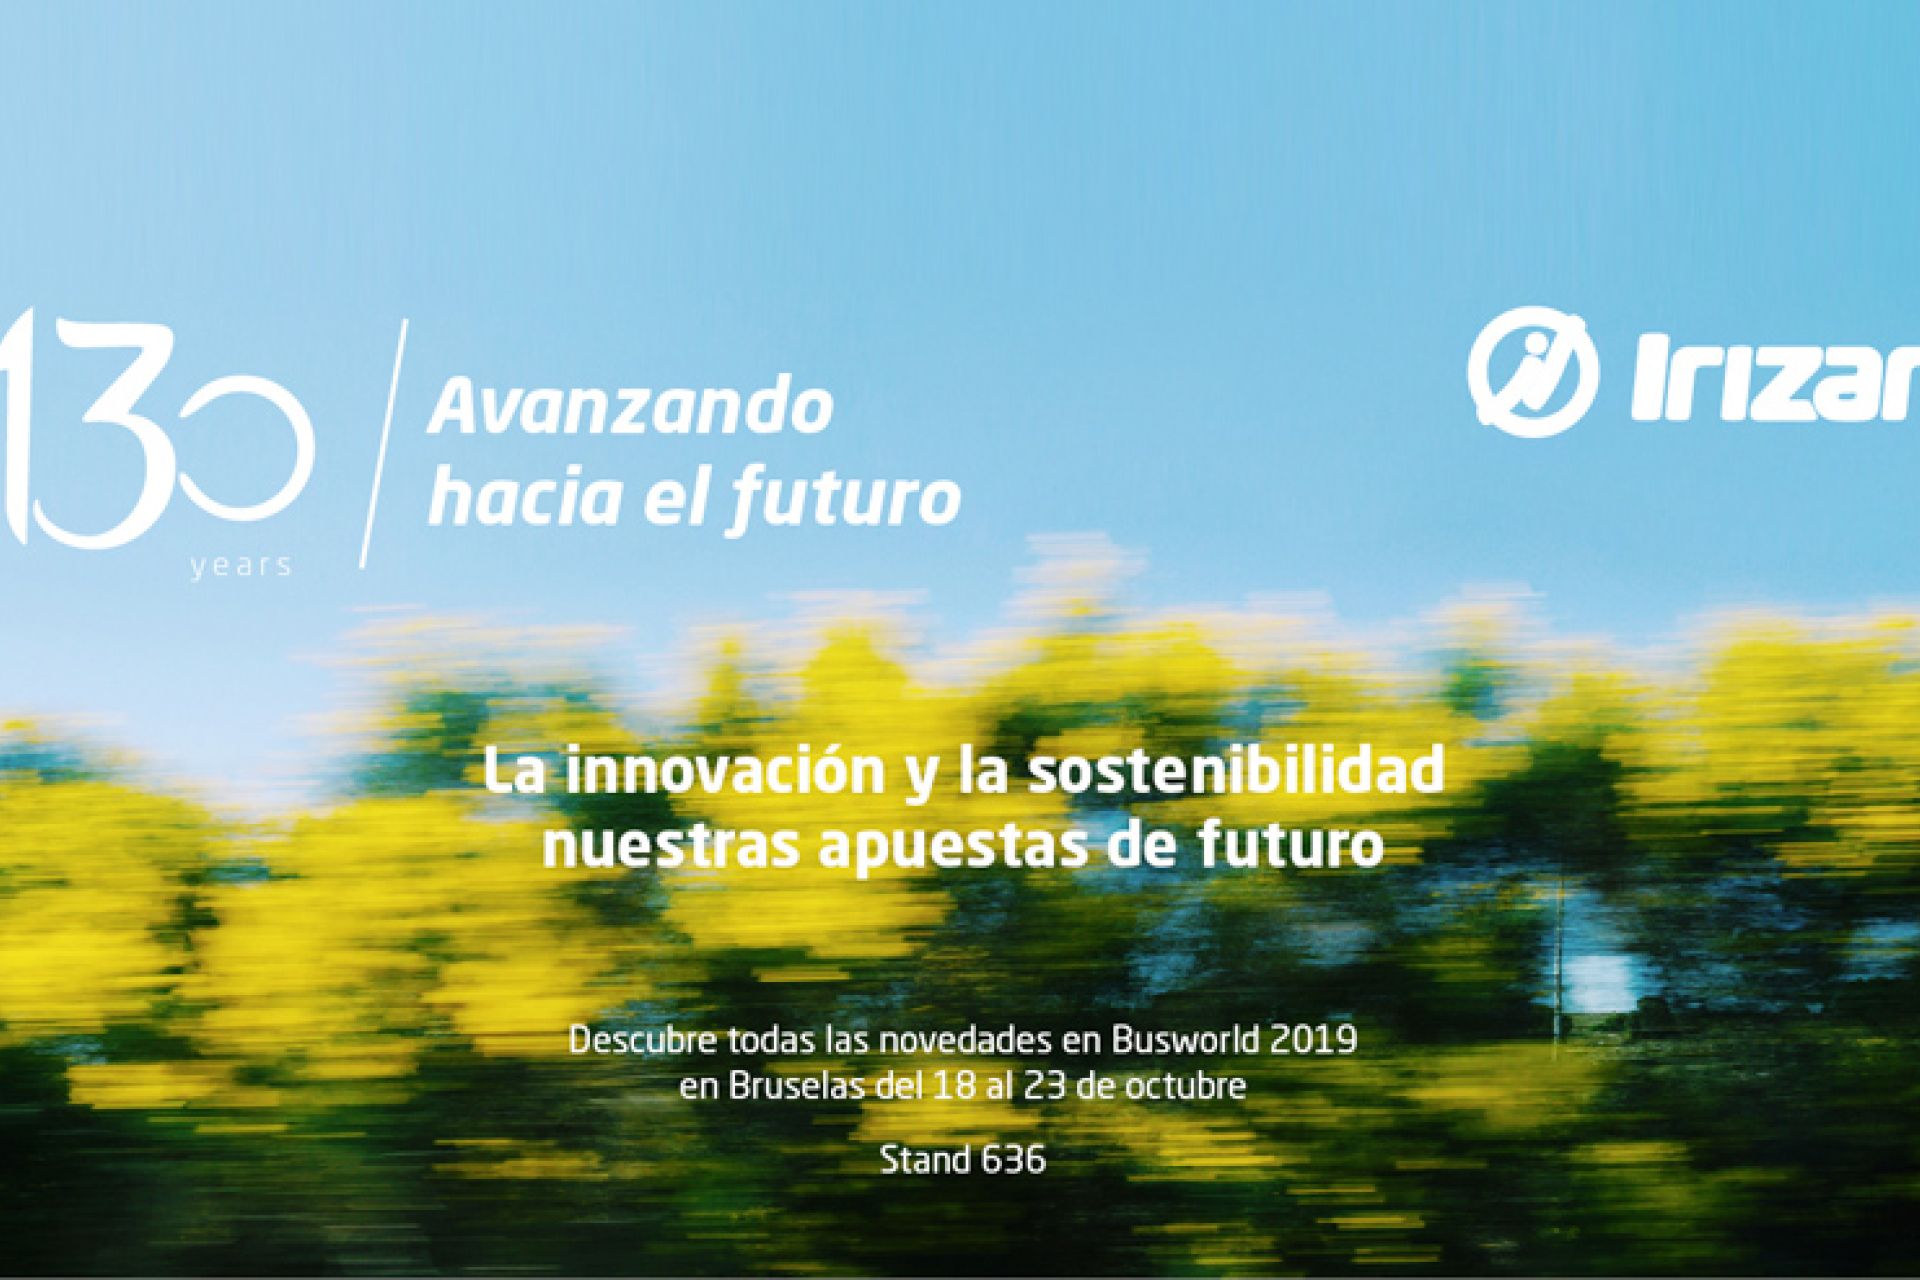 The Busworld International Bus and Coach Fair, which will take place between the 18th and 23rd of October, will feature an unprecedented display of the Irizar Group’s brand, technology and sustainability strategy